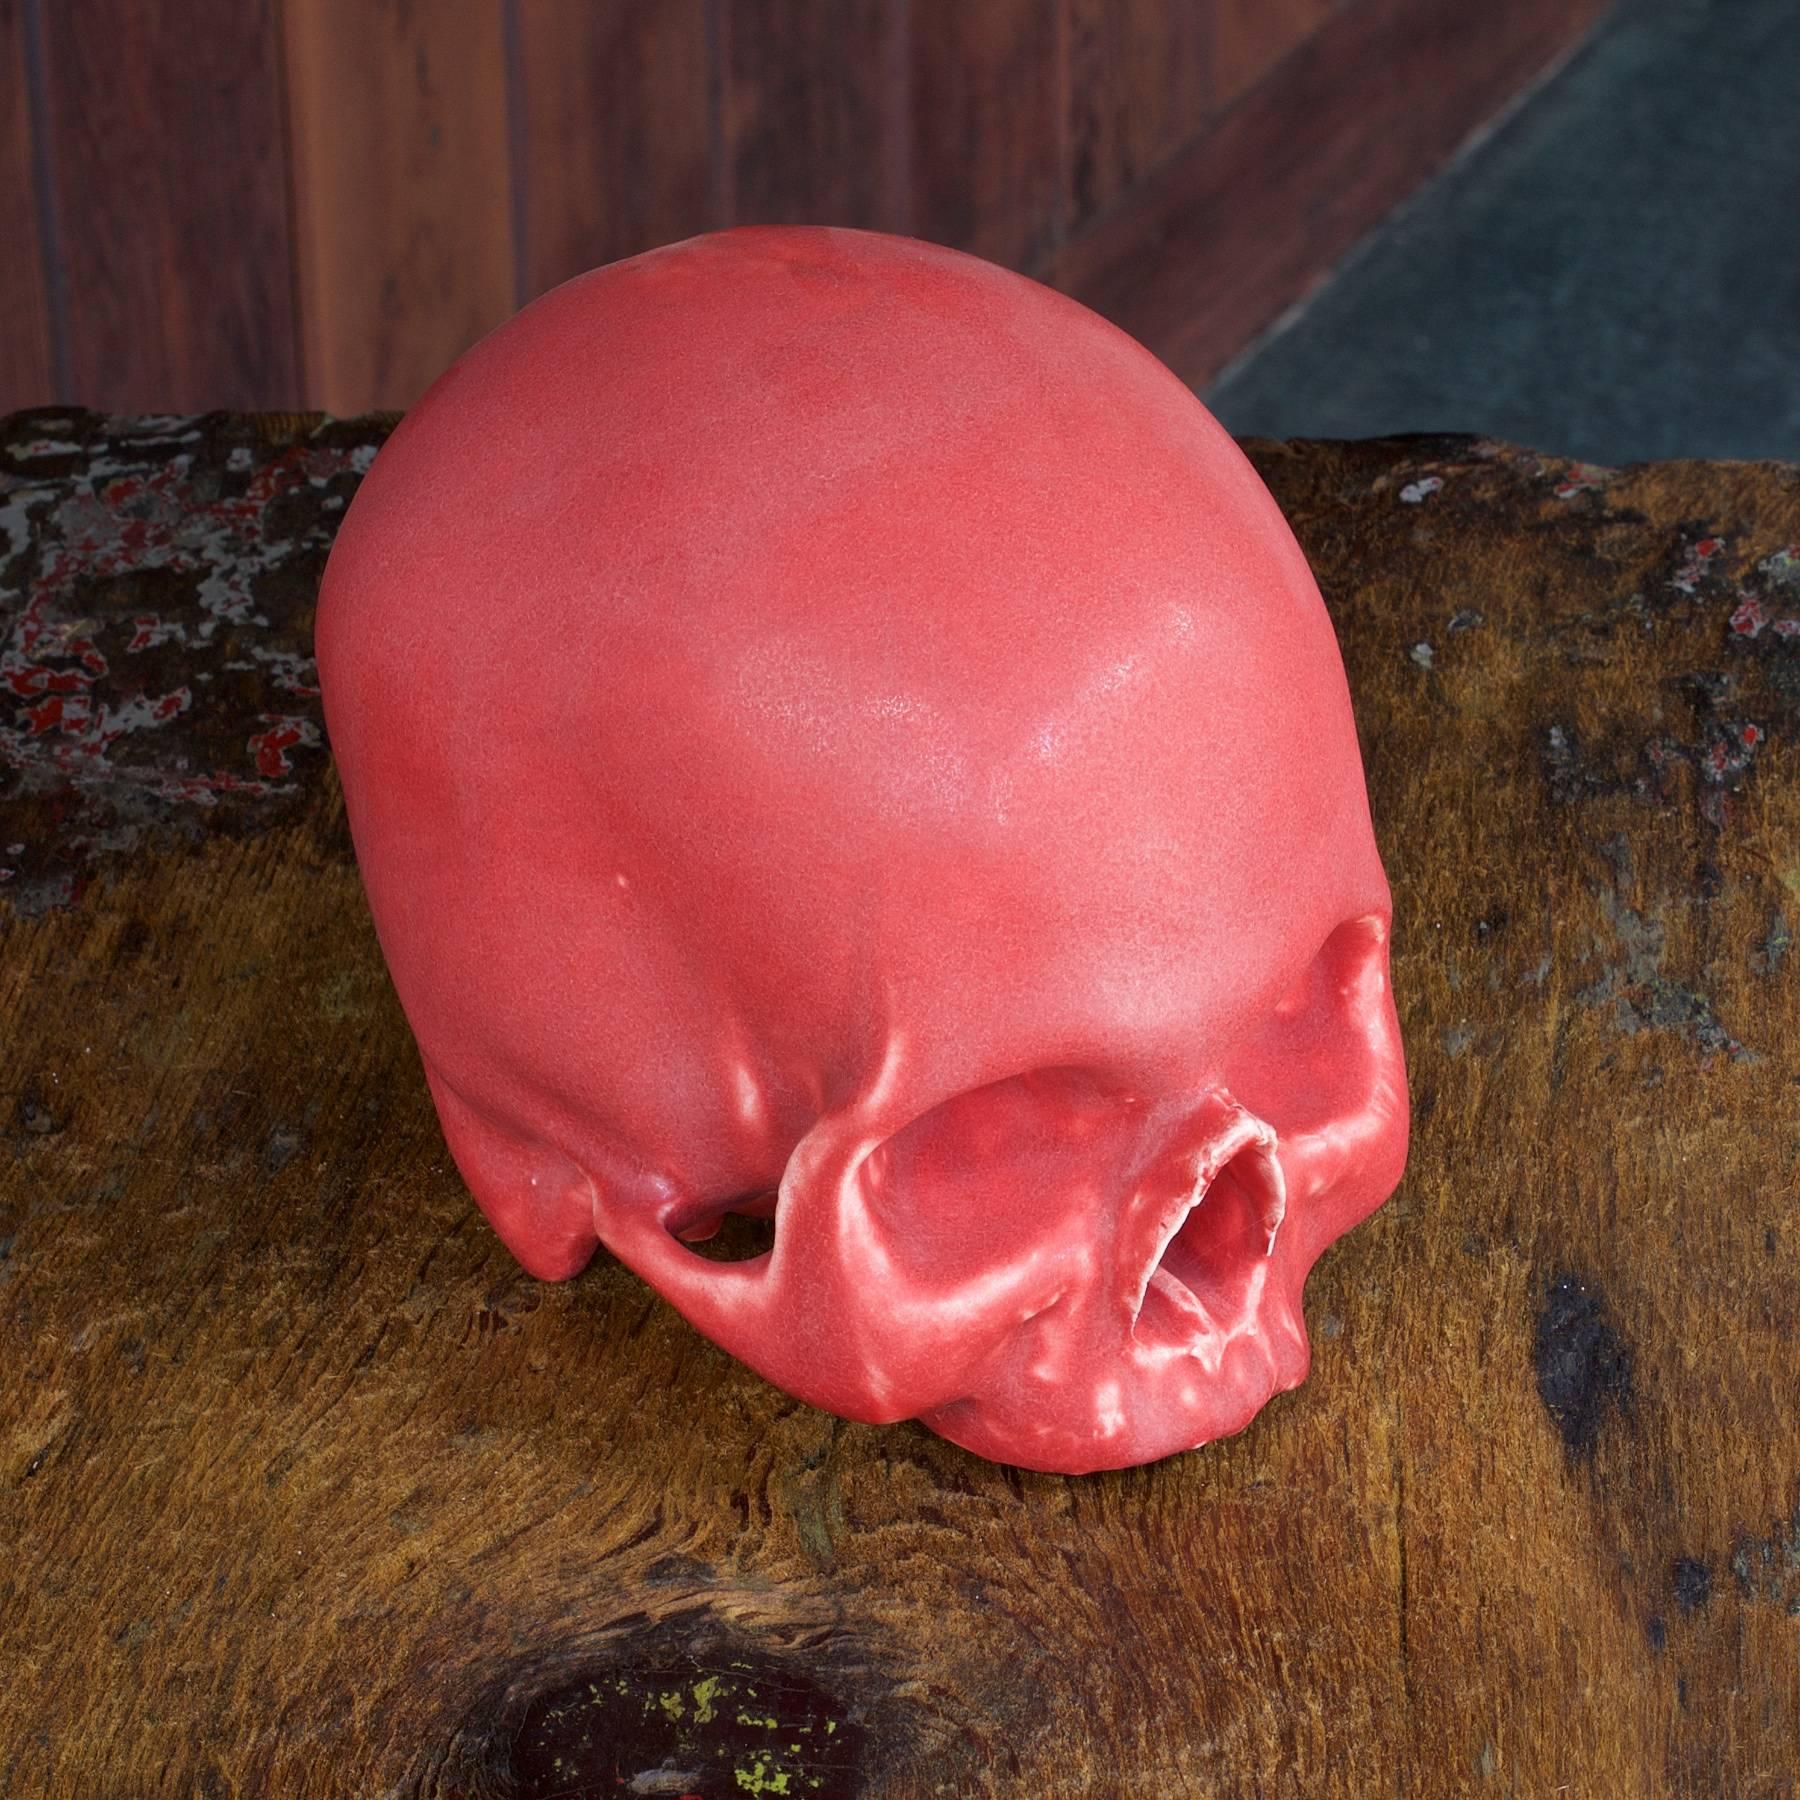 A really great contemporary reproduction of a 19th century Arts & Crafts ceramic skull right down the glaze. Beautiful.